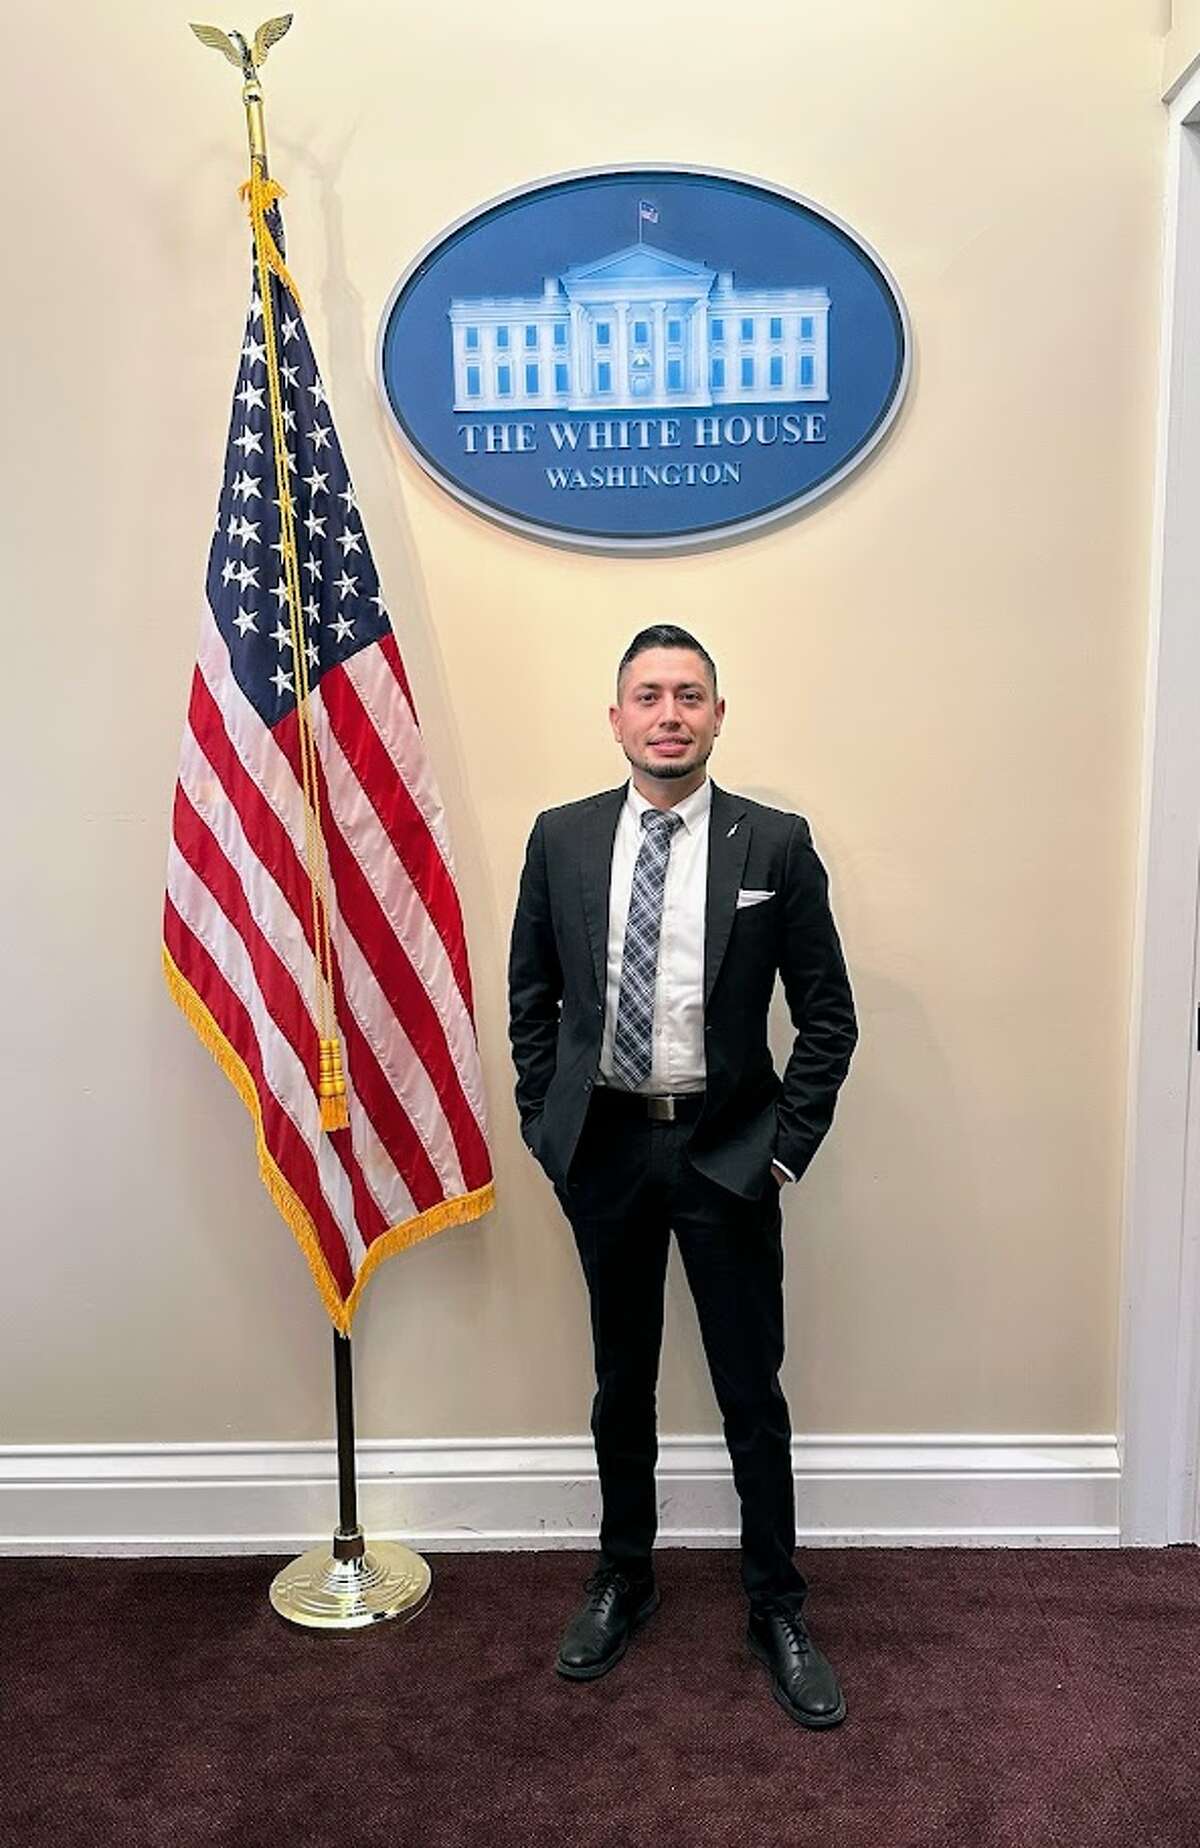 City of Laredo Health Department Director Dr. Richard Chamberlain presented at the White House on Wednesday, Nov. 16 during the "Summit on COVID-19 Equity and What Works Showcase."